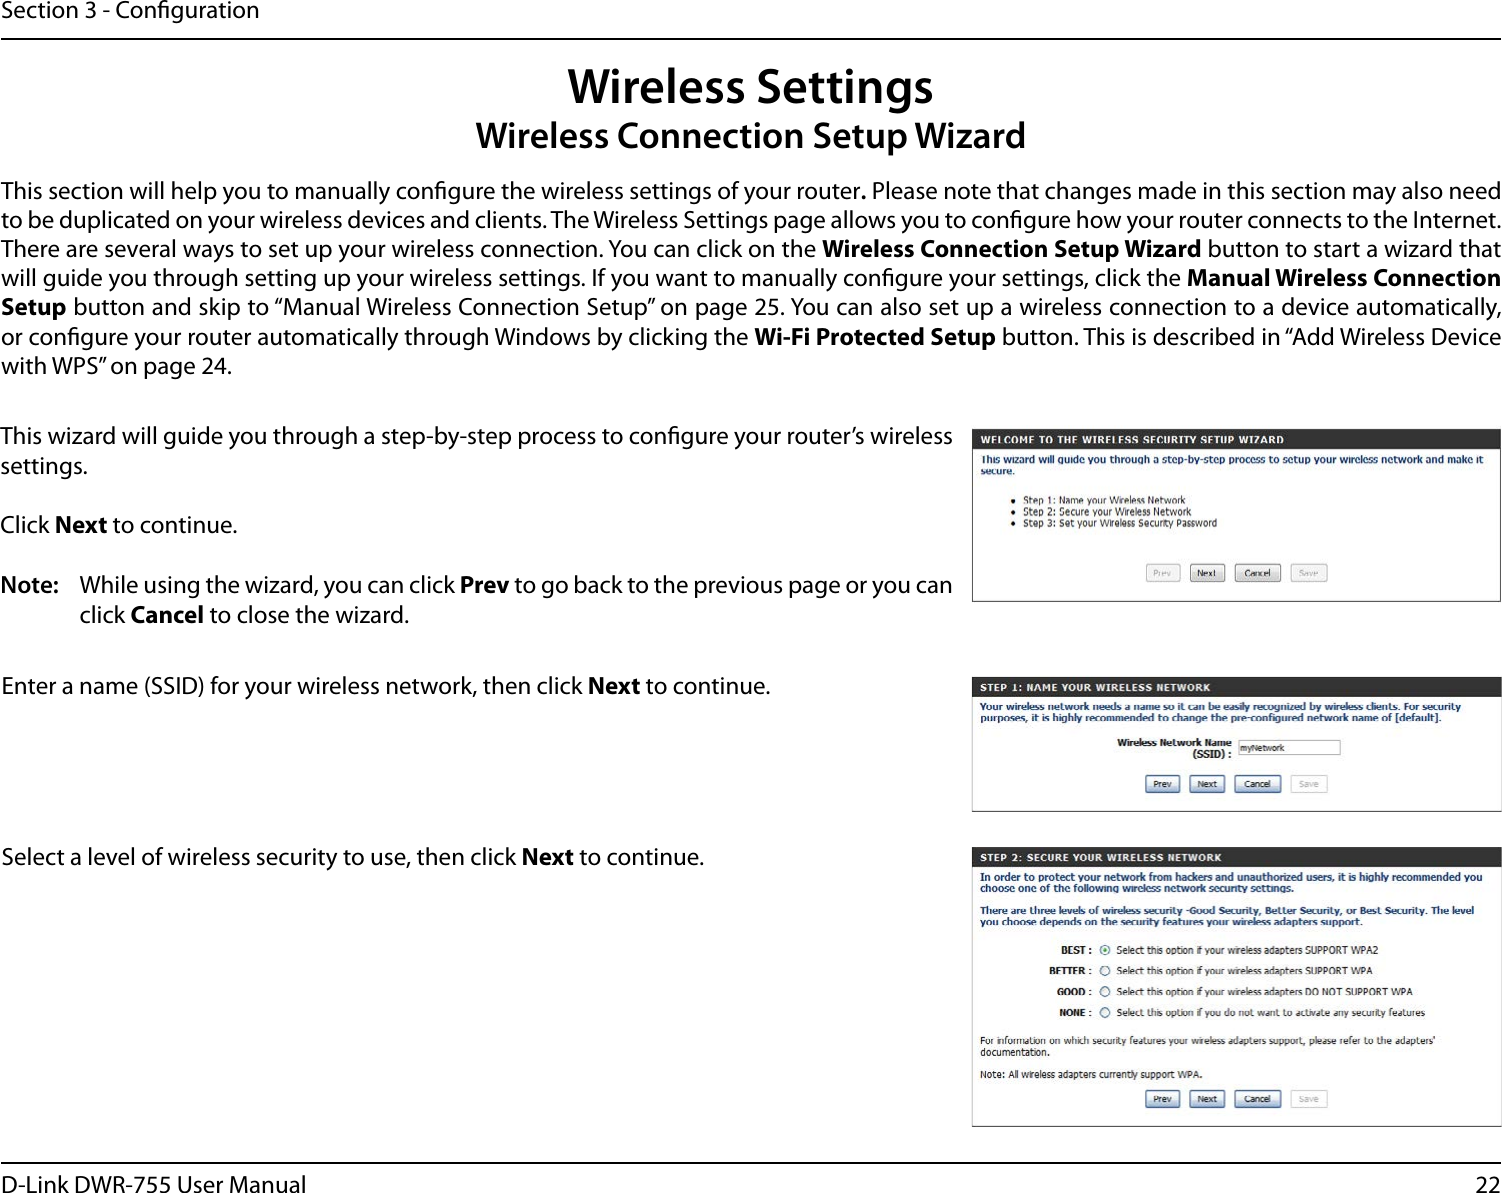 22D-Link DWR-755 User ManualSection 3 - CongurationWireless SettingsWireless Connection Setup WizardThis section will help you to manually congure the wireless settings of your router. Please note that changes made in this section may also need to be duplicated on your wireless devices and clients. The Wireless Settings page allows you to congure how your router connects to the Internet. There are several ways to set up your wireless connection. You can click on the Wireless Connection Setup Wizard button to start a wizard that will guide you through setting up your wireless settings. If you want to manually congure your settings, click the Manual Wireless Connection Setup button and skip to “Manual Wireless Connection Setup” on page 25. You can also set up a wireless connection to a device automatically, or congure your router automatically through Windows by clicking the Wi-Fi Protected Setup button. This is described in “Add Wireless Device with WPS” on page 24.This wizard will guide you through a step-by-step process to congure your router’s wireless settings.Click Next to continue.Note:  While using the wizard, you can click Prev to go back to the previous page or you can click Cancel to close the wizard.Enter a name (SSID) for your wireless network, then click Next to continue.Select a level of wireless security to use, then click Next to continue.